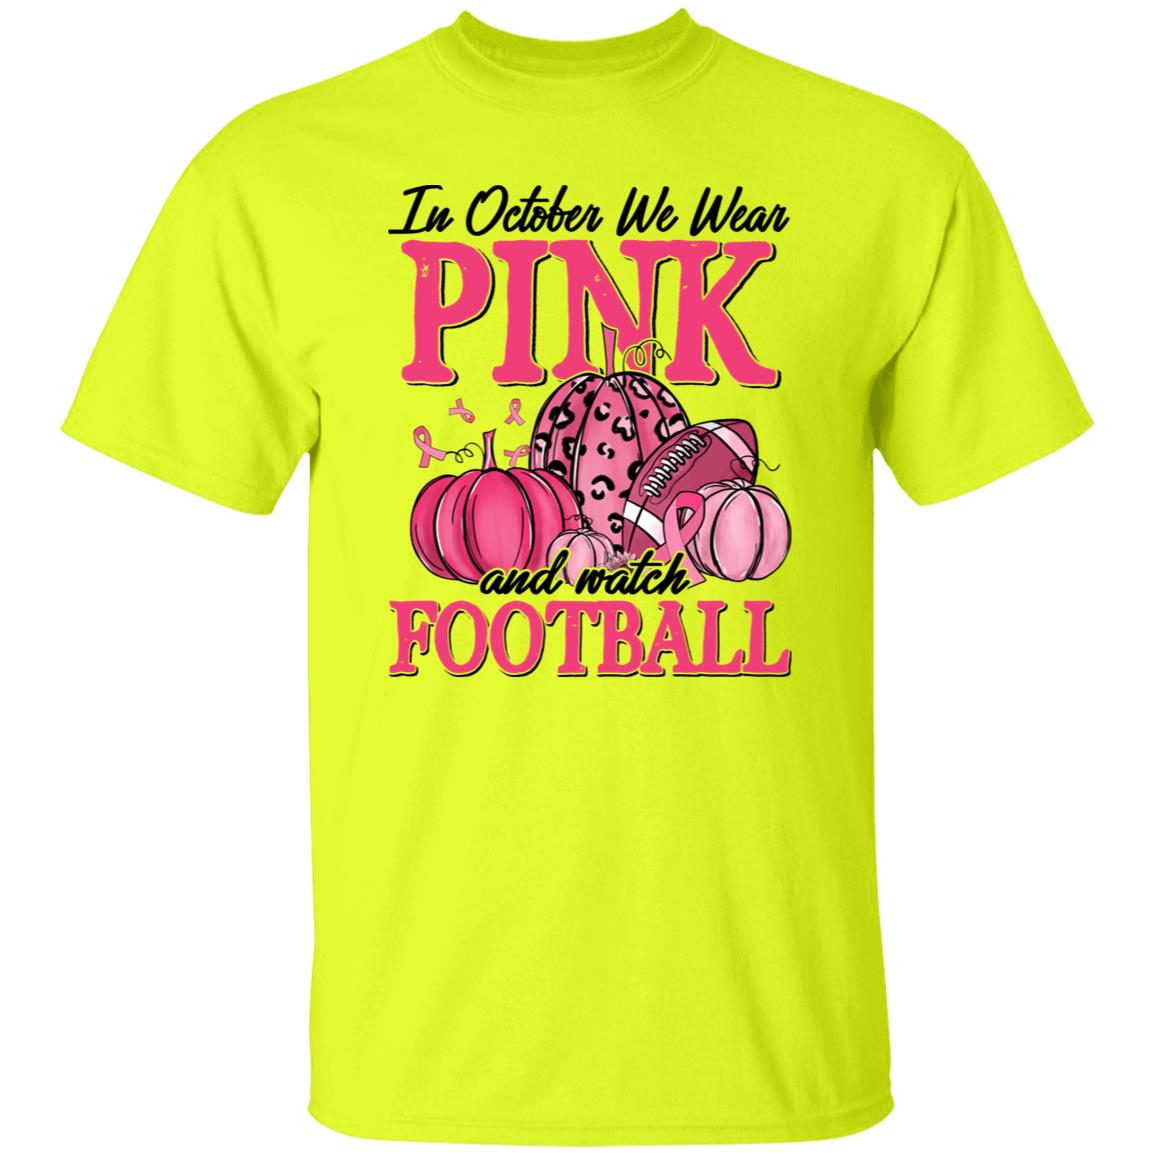 In october we wear pink shirt breast cancer awareness football